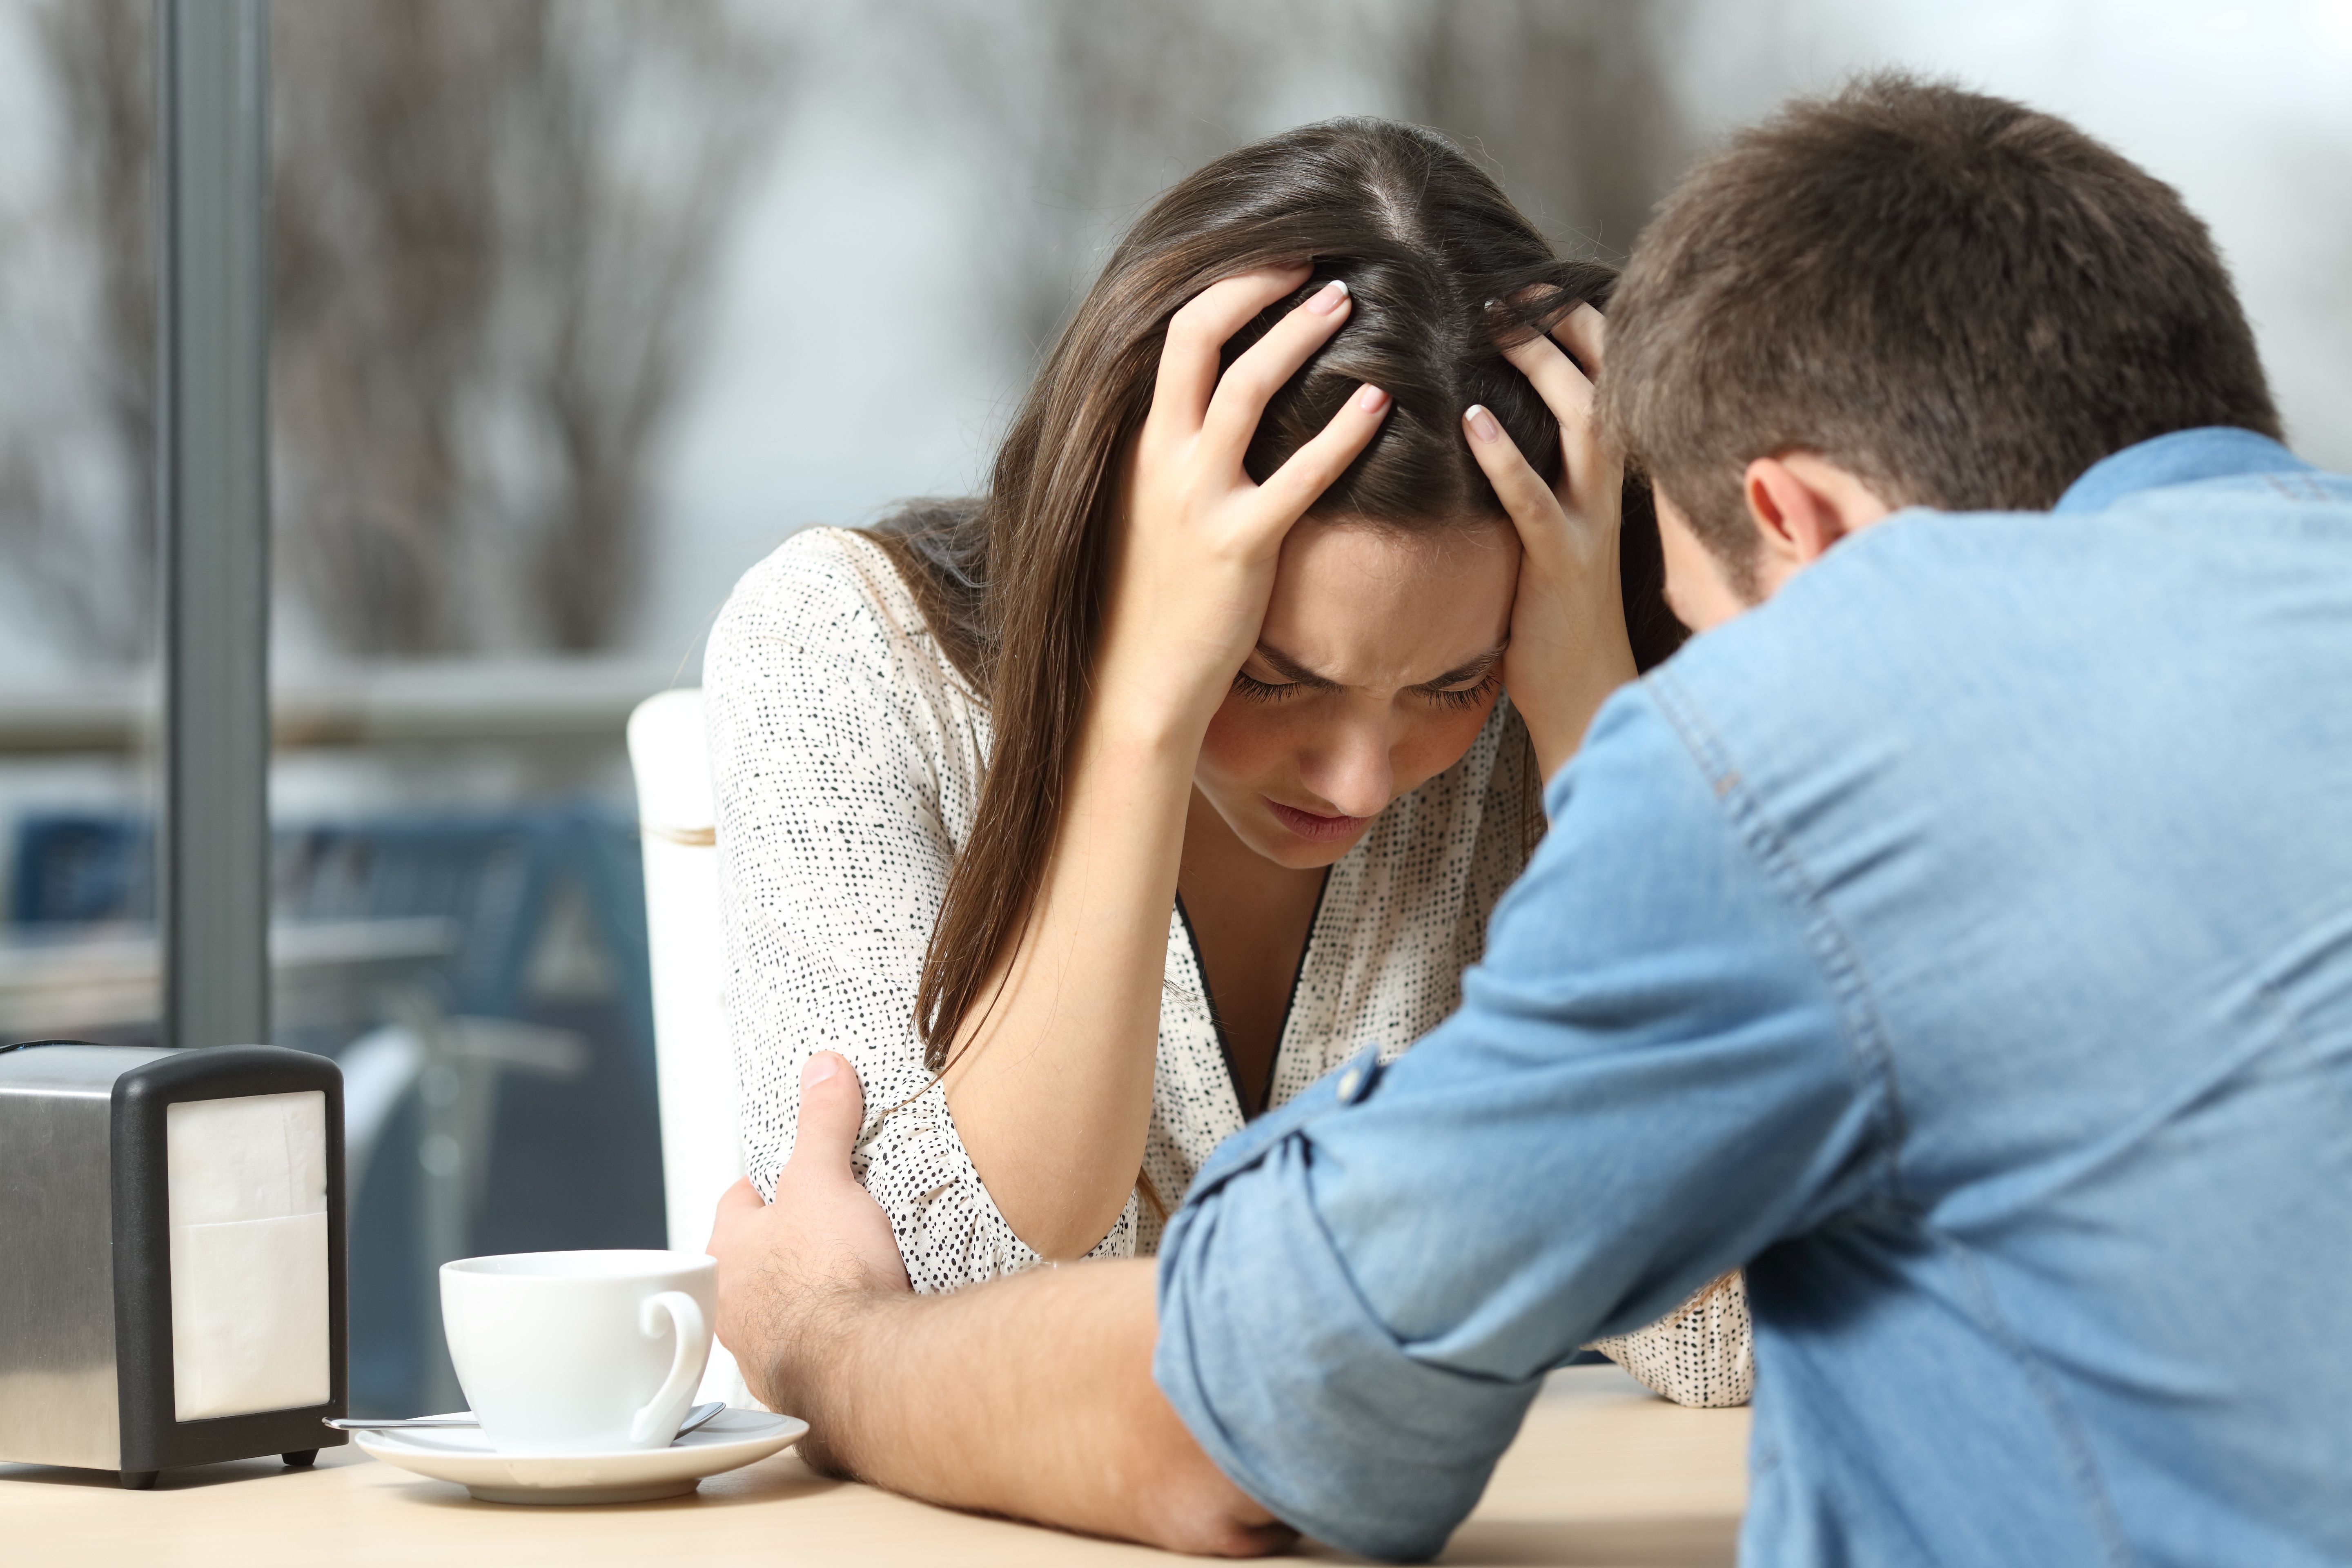 A man and a woman look upset while talking. | Source: Shutterstock